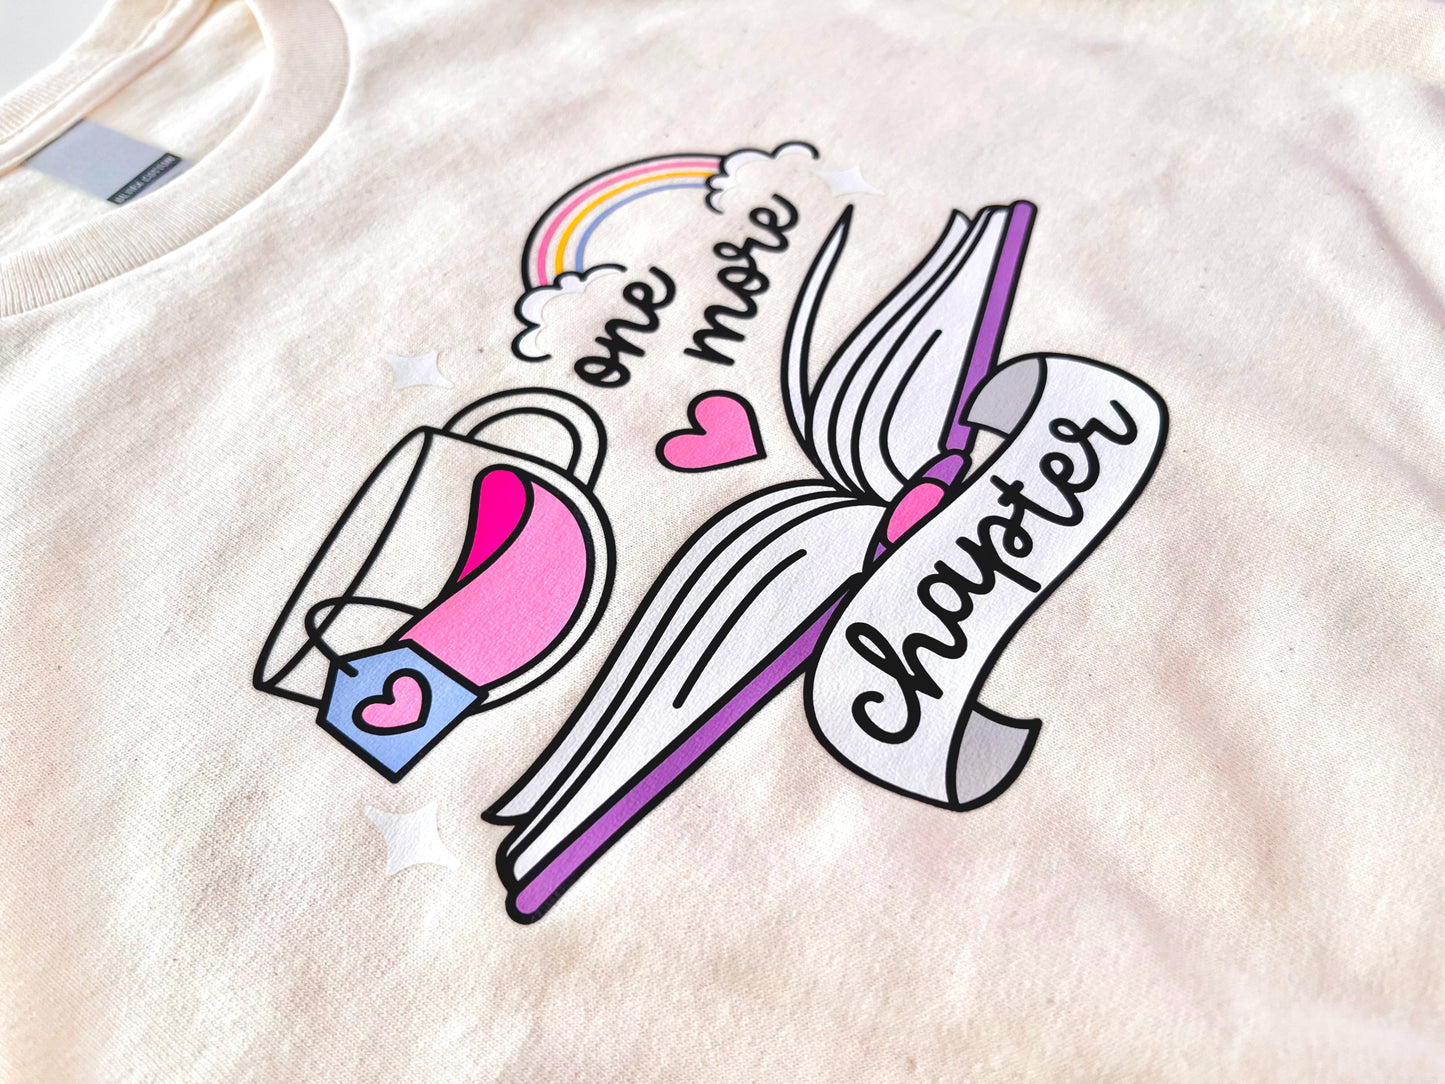 One More Chapter T-Shirt